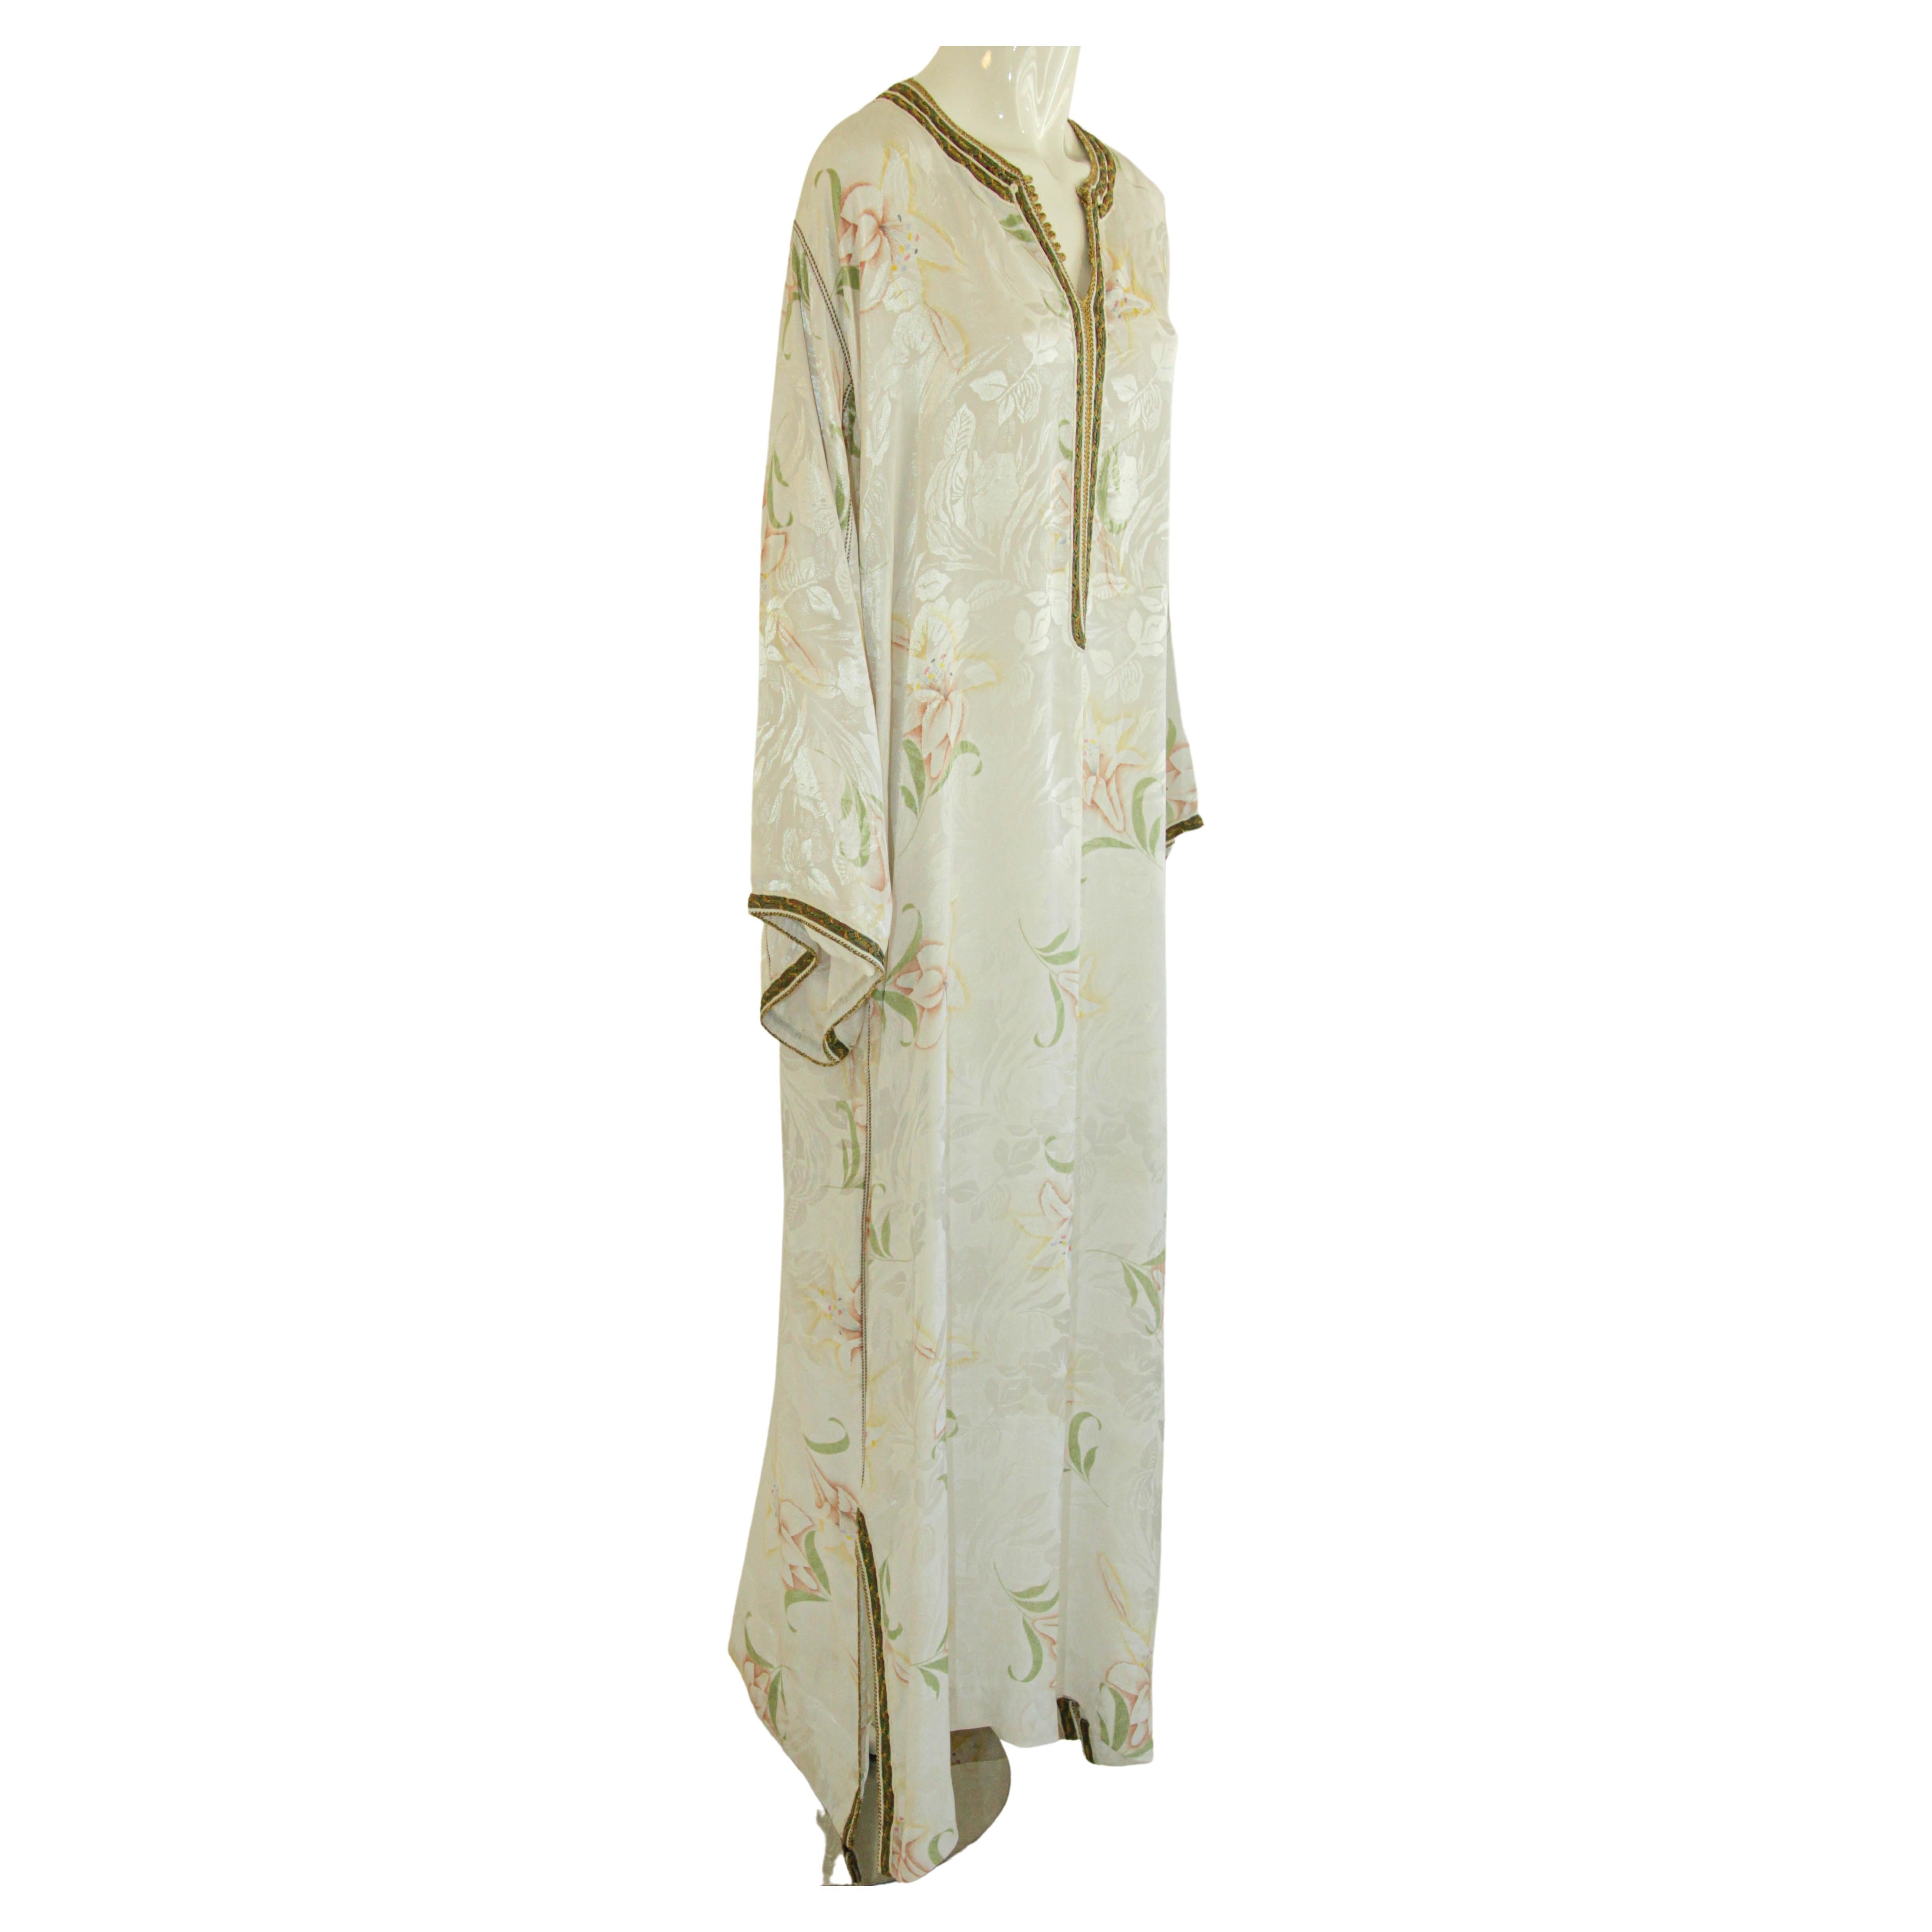 Moroccan White Floral Caftan Set In Good Condition For Sale In North Hollywood, CA